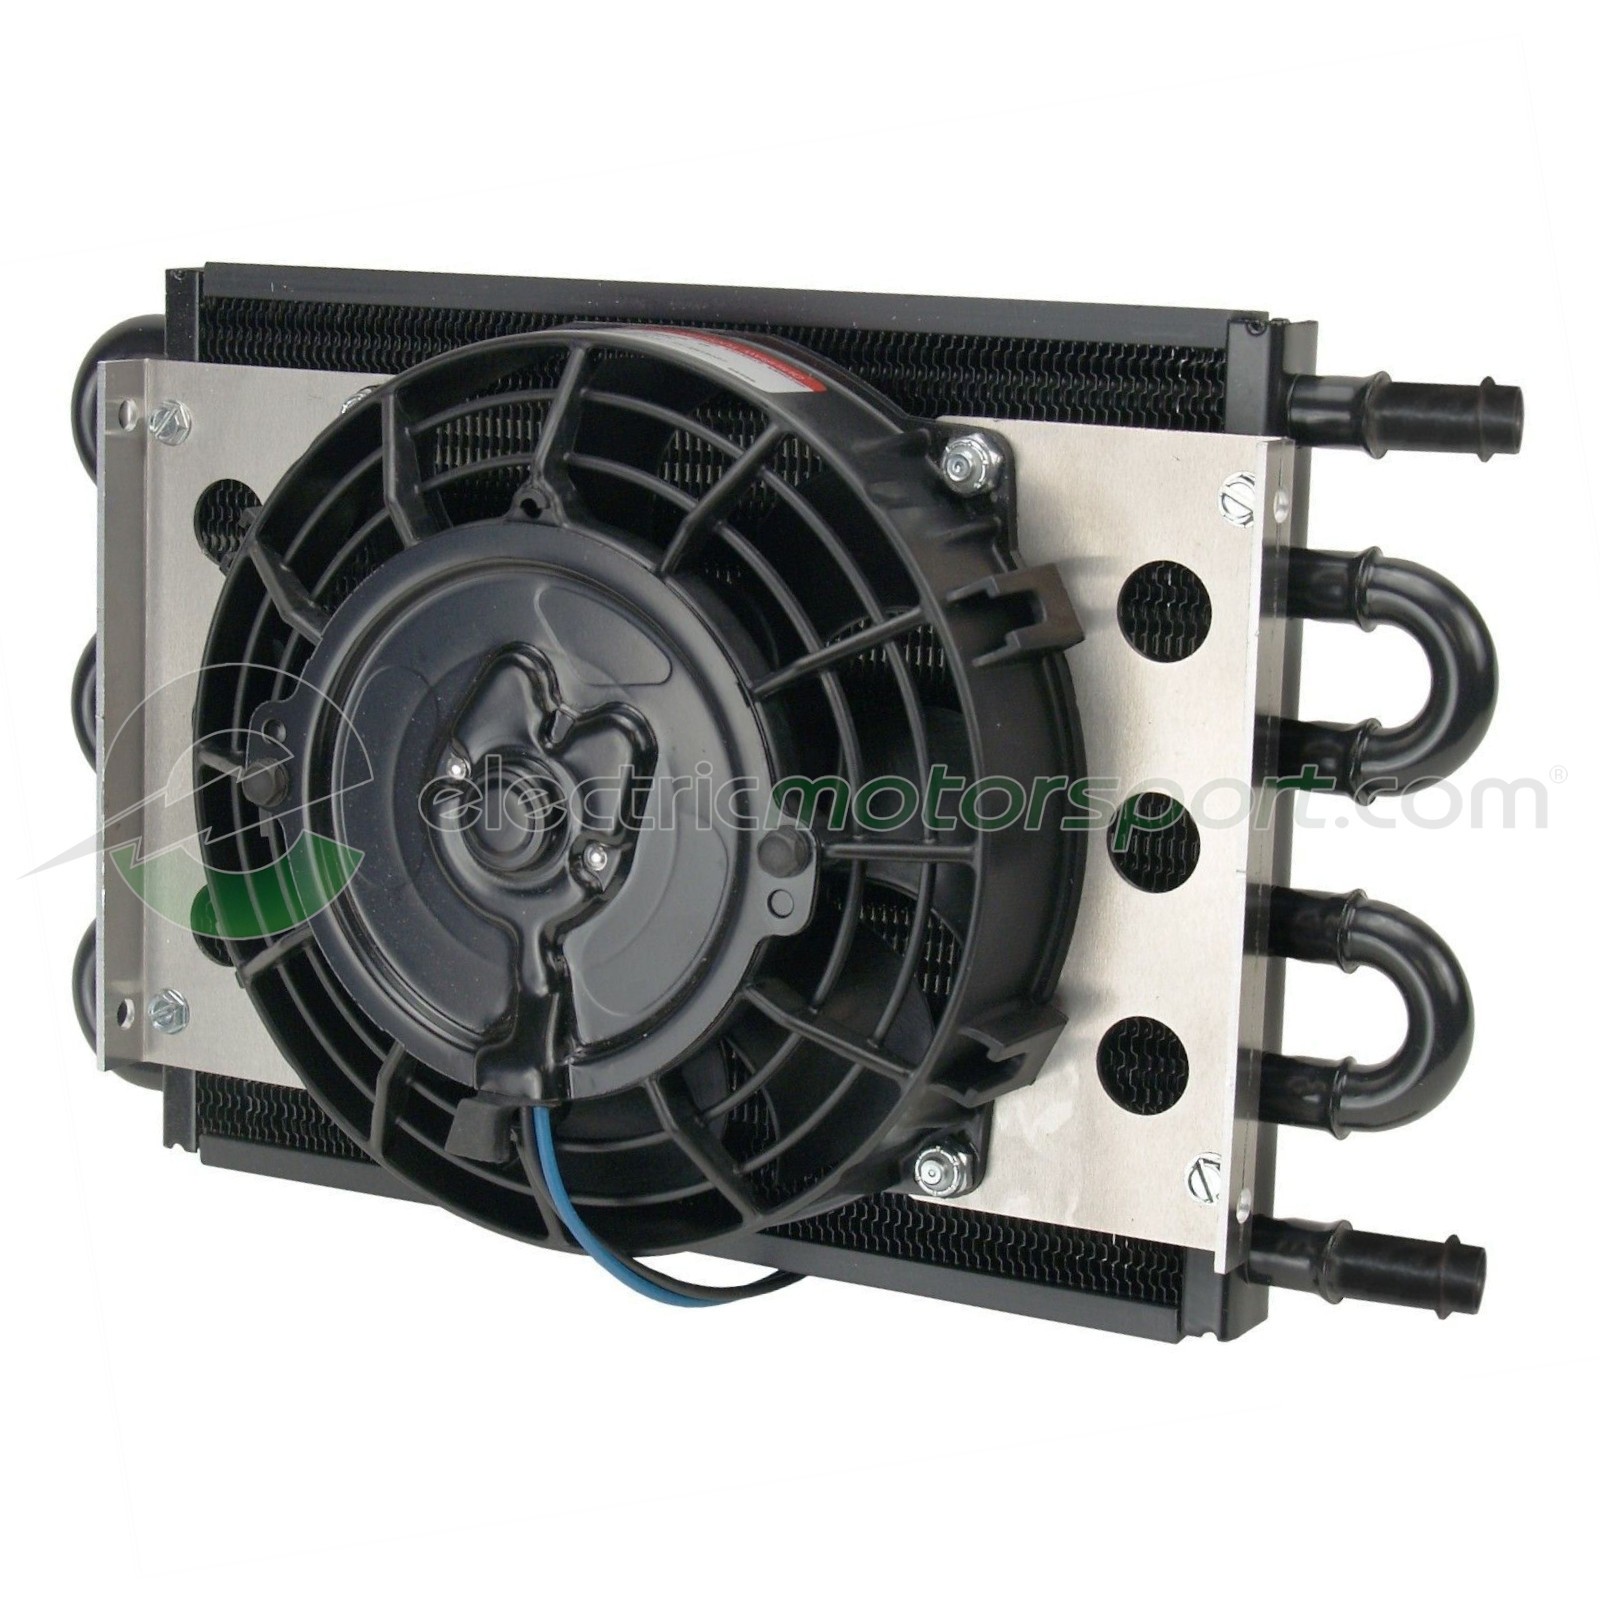 Radiator with 1/2 Inch Hose Barb Inlets and Electric Fan